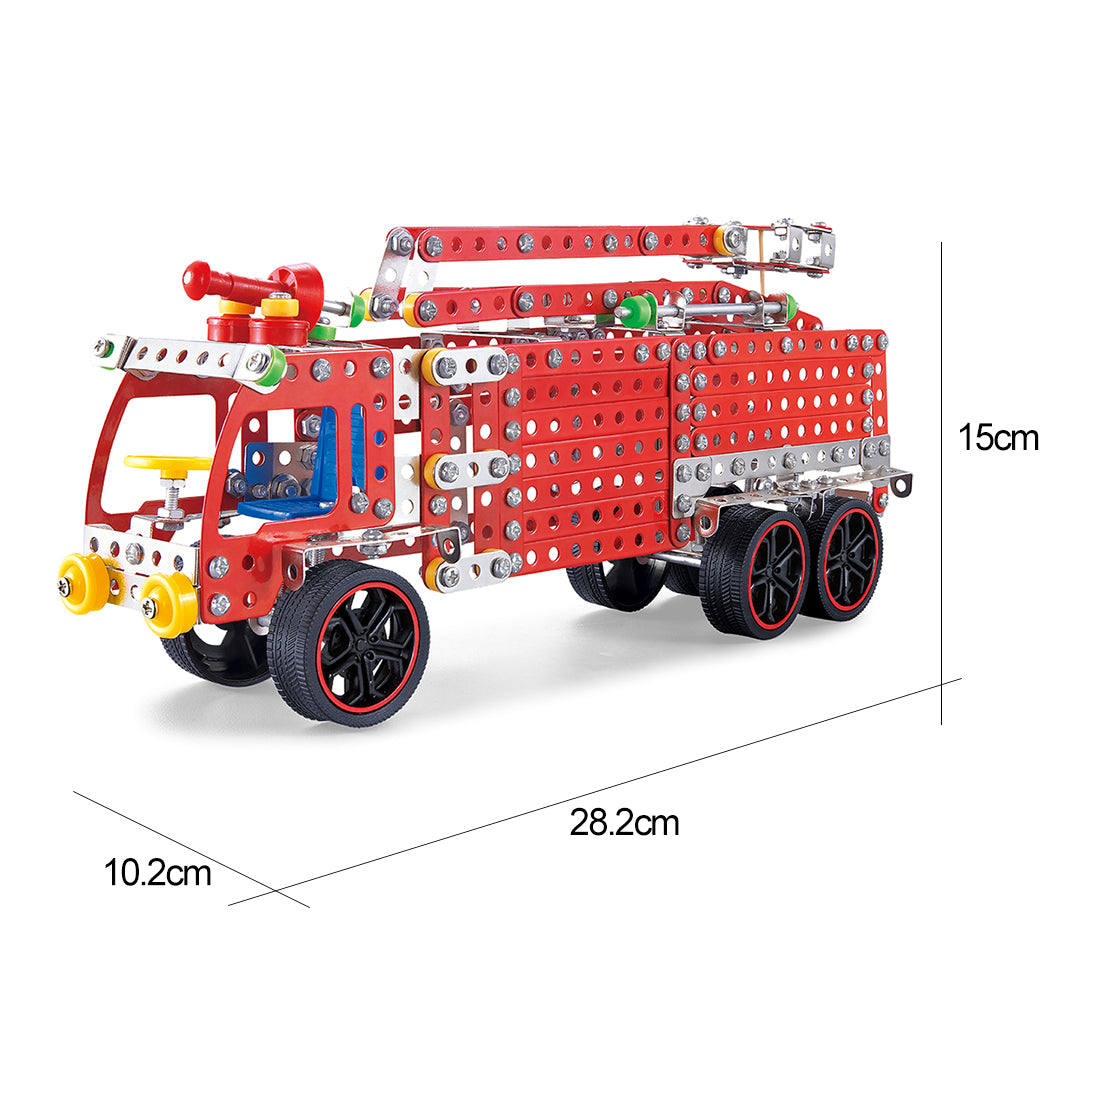 528Pcs Assembly Metal Fire Fighting Aerial Ladder Firetruck Model Kit STEM Engineering Education Toy